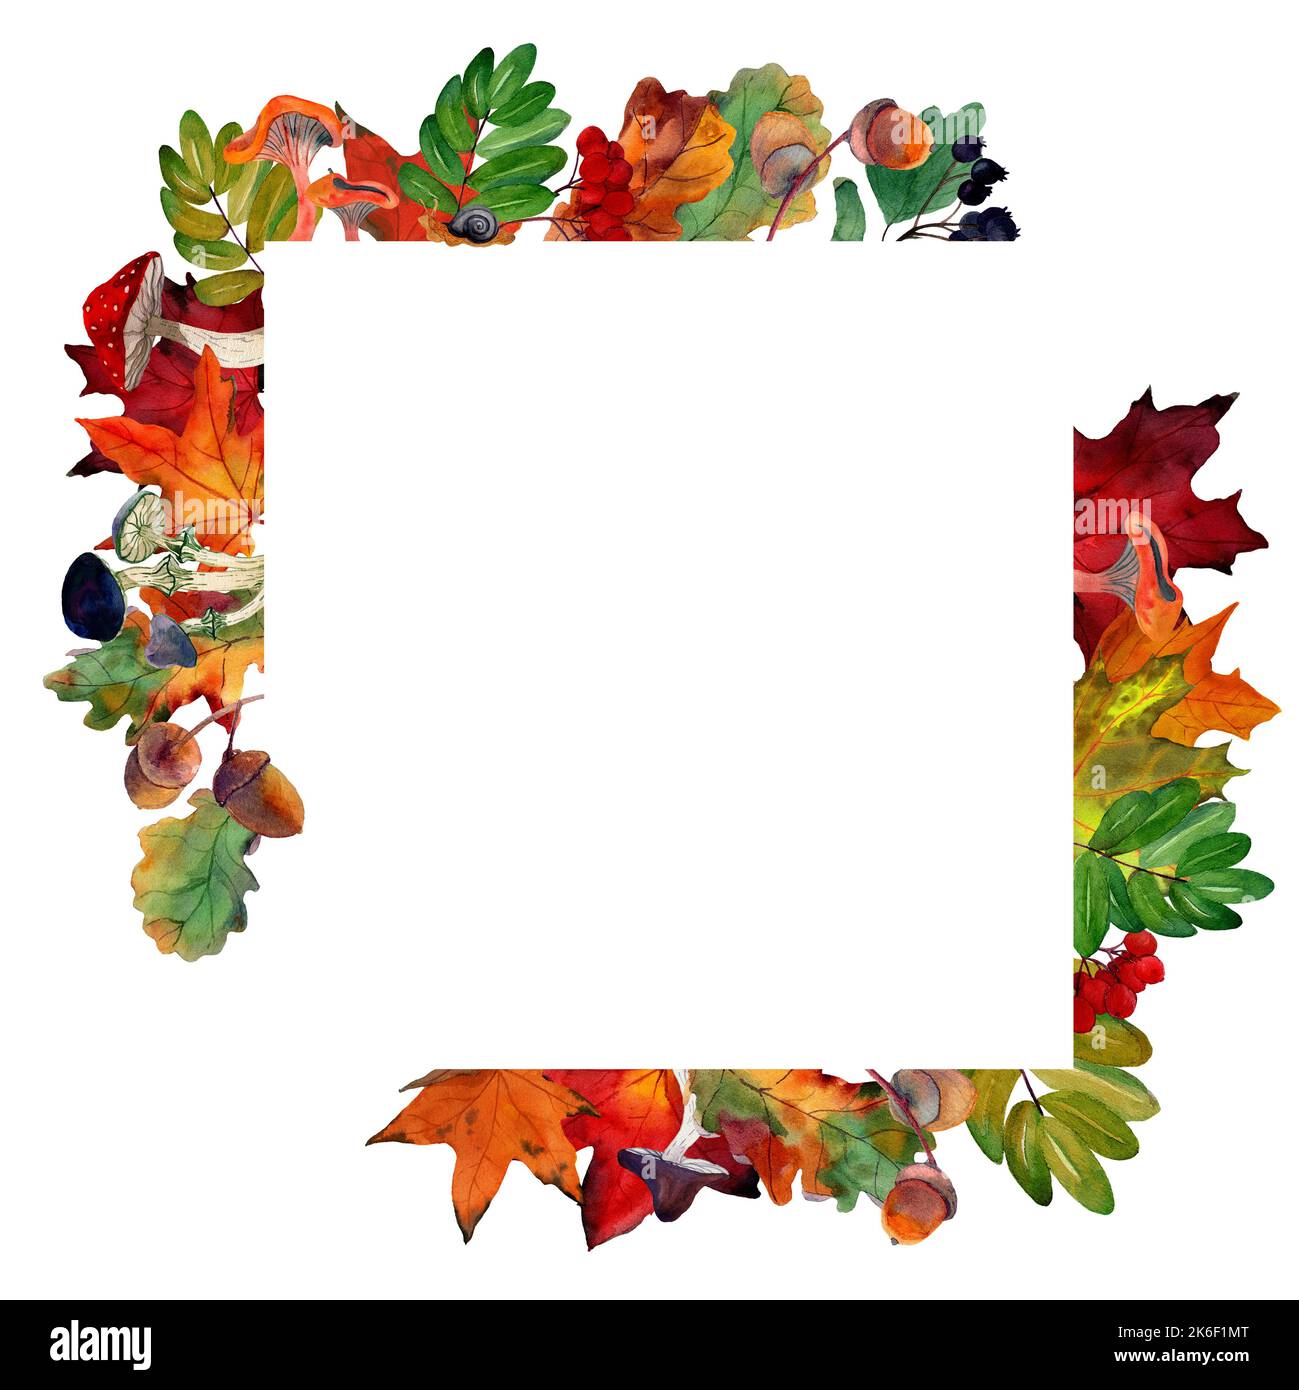 Watercolor draw of maple leaves and mushrooms in ornamental border. Frame with autumn rowan, acorns isolated on background. Template for offer, invite Stock Photo